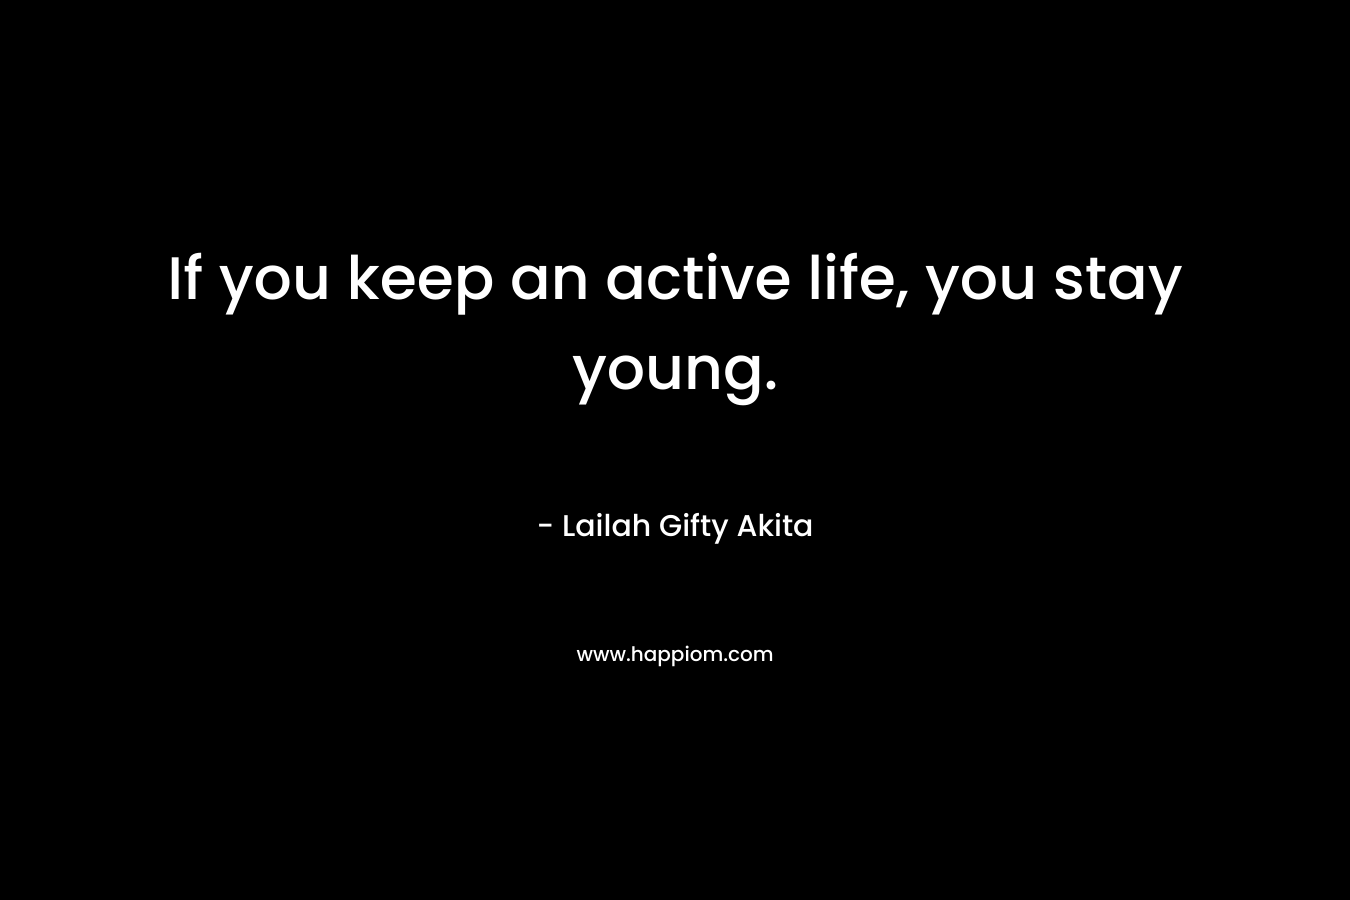 If you keep an active life, you stay young.